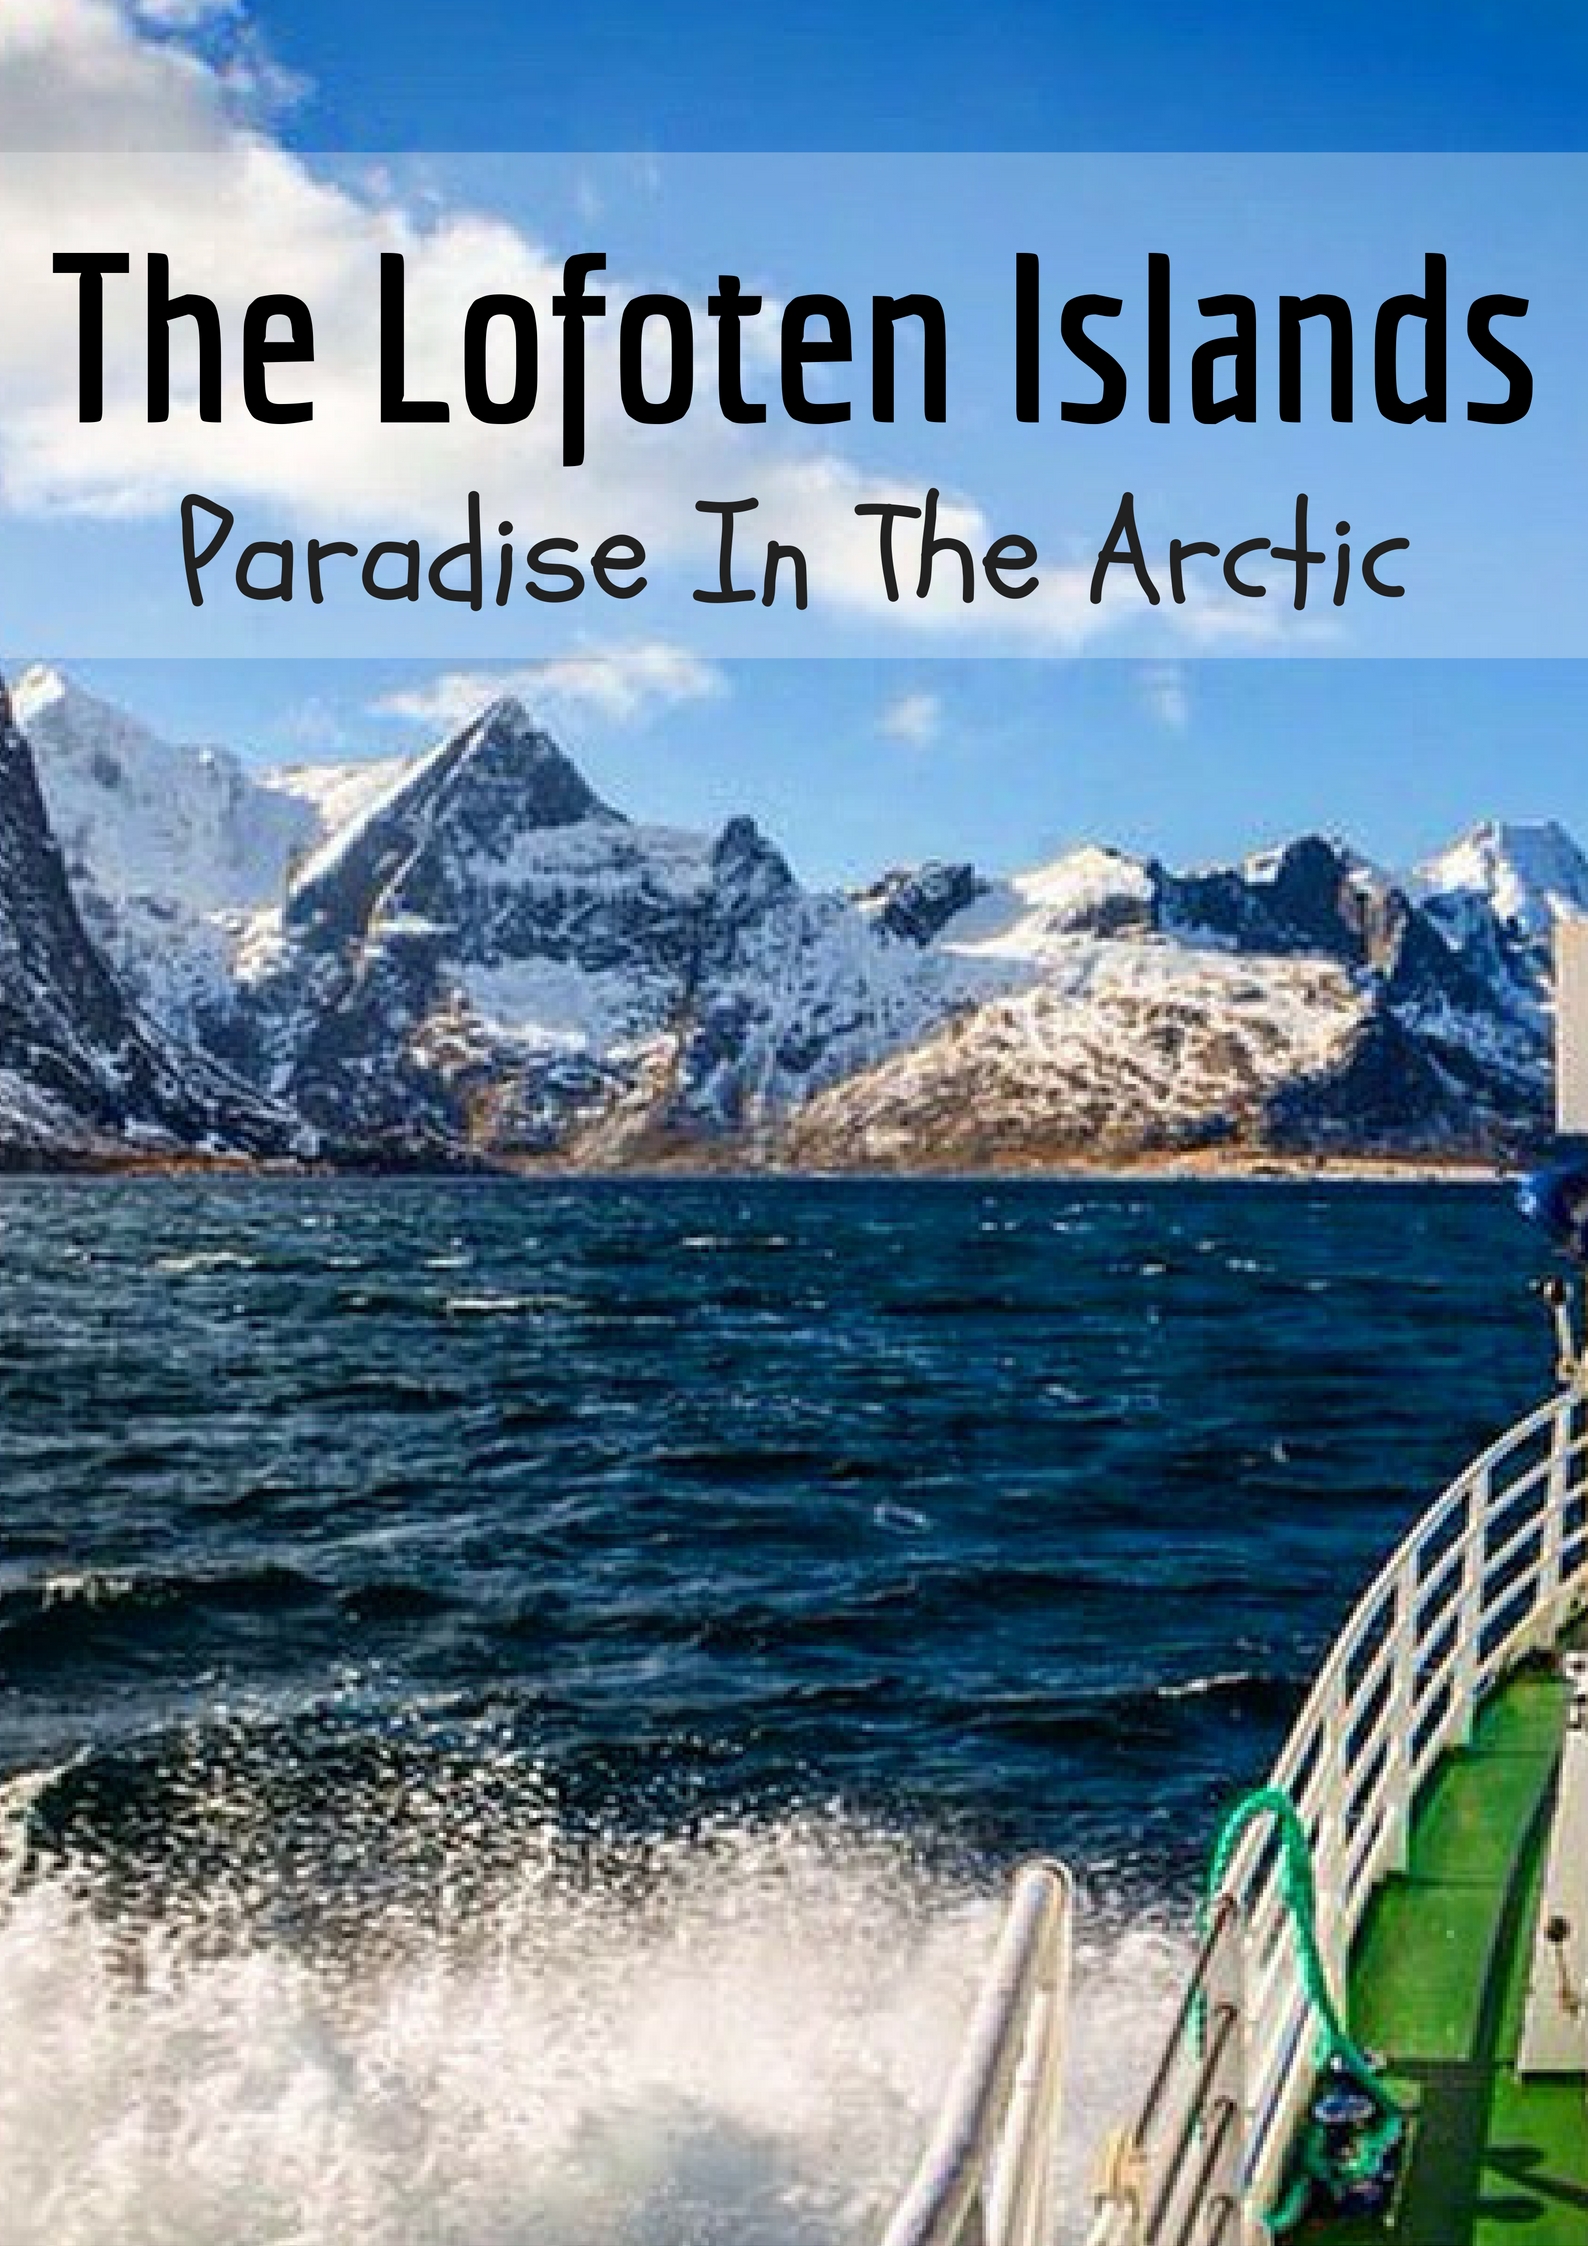 A Guide To The Lofoten Islands